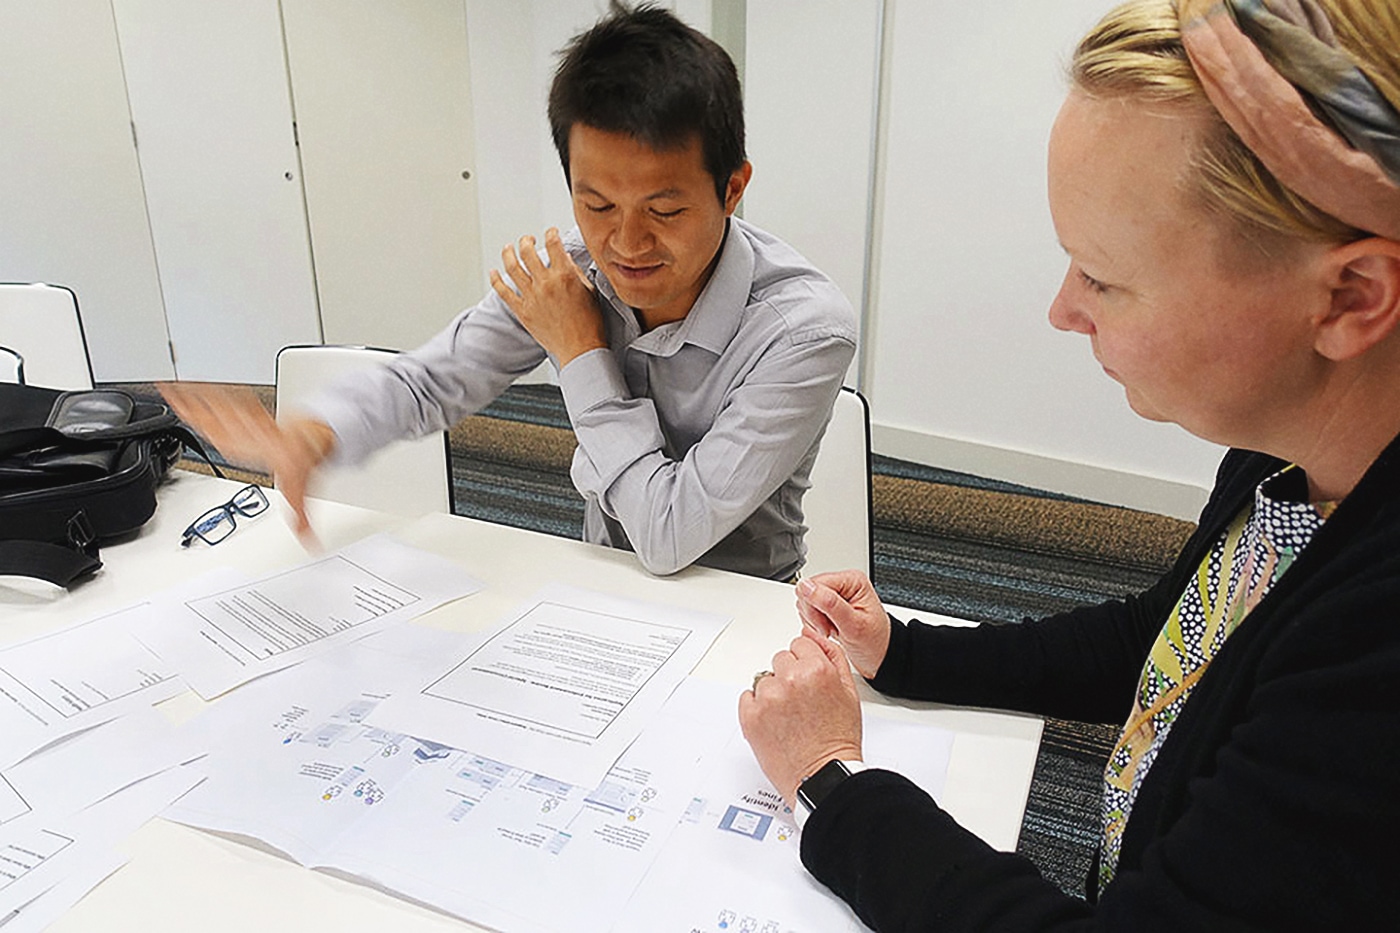 A photo of two people sitting at a table reviewing some printed documents. There is a user flow diagram printed, which outlines the key steps someone takes within a fines journey.